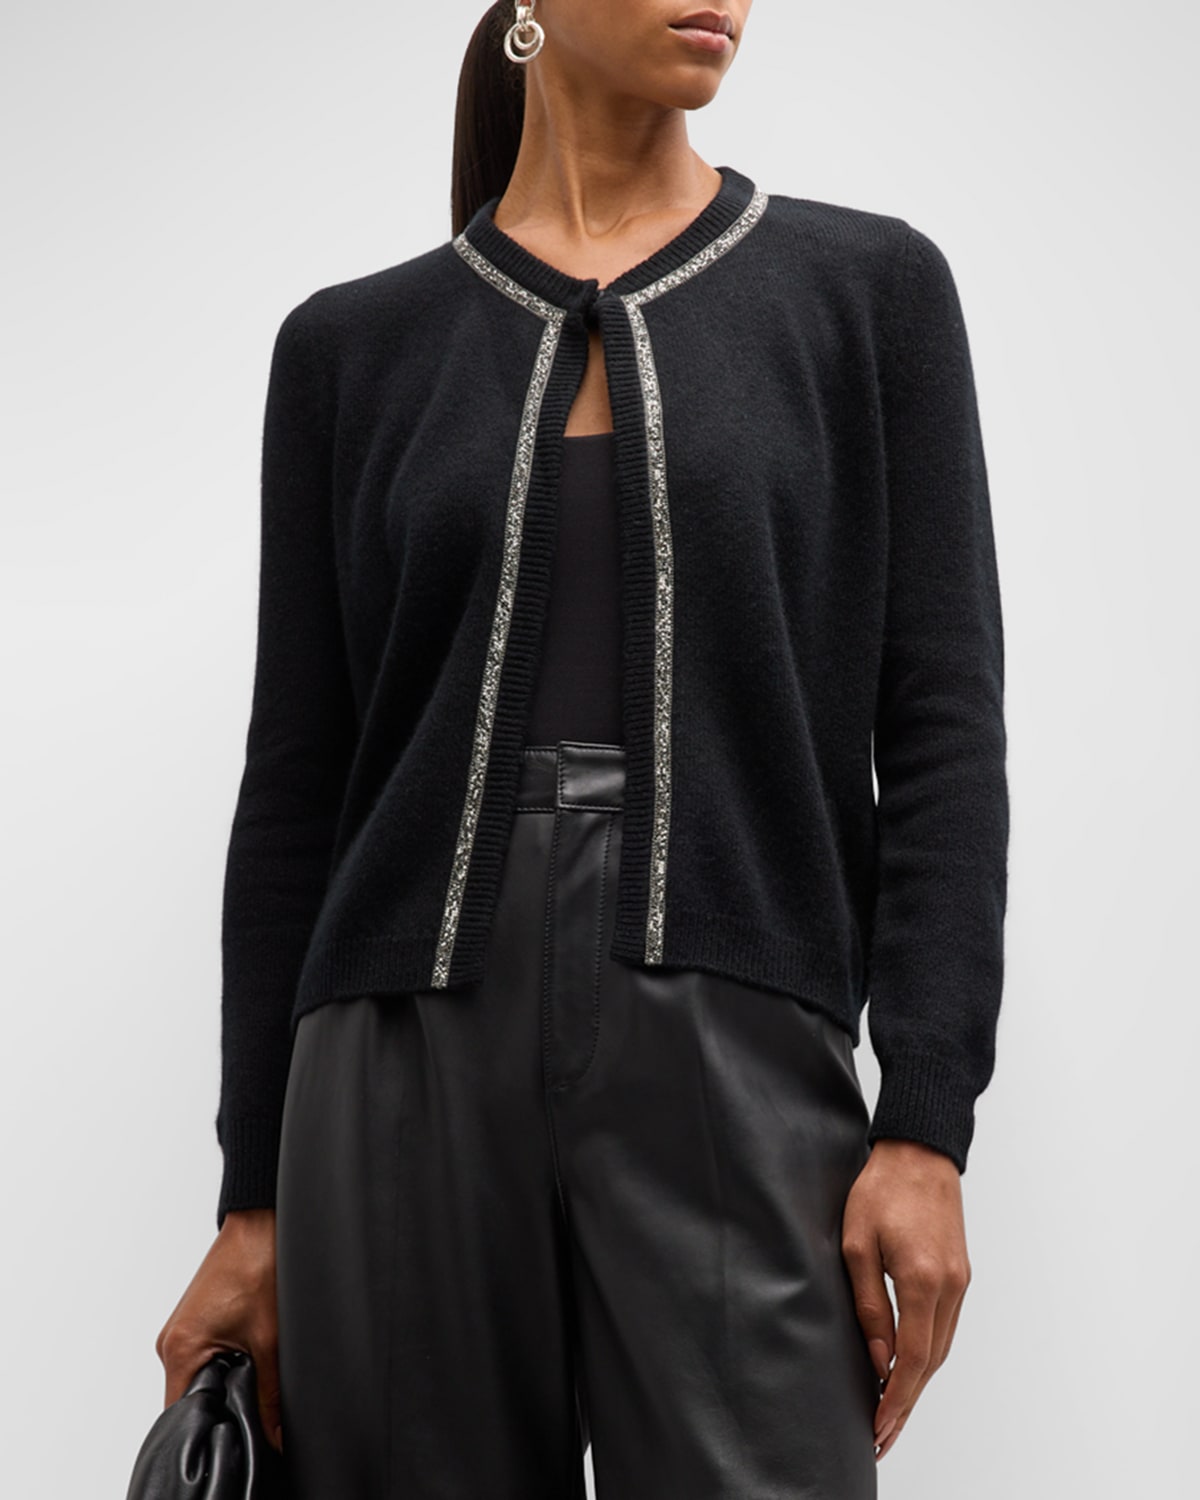 Neiman Marcus Cashmere Shrug With Embellished Trim In Black